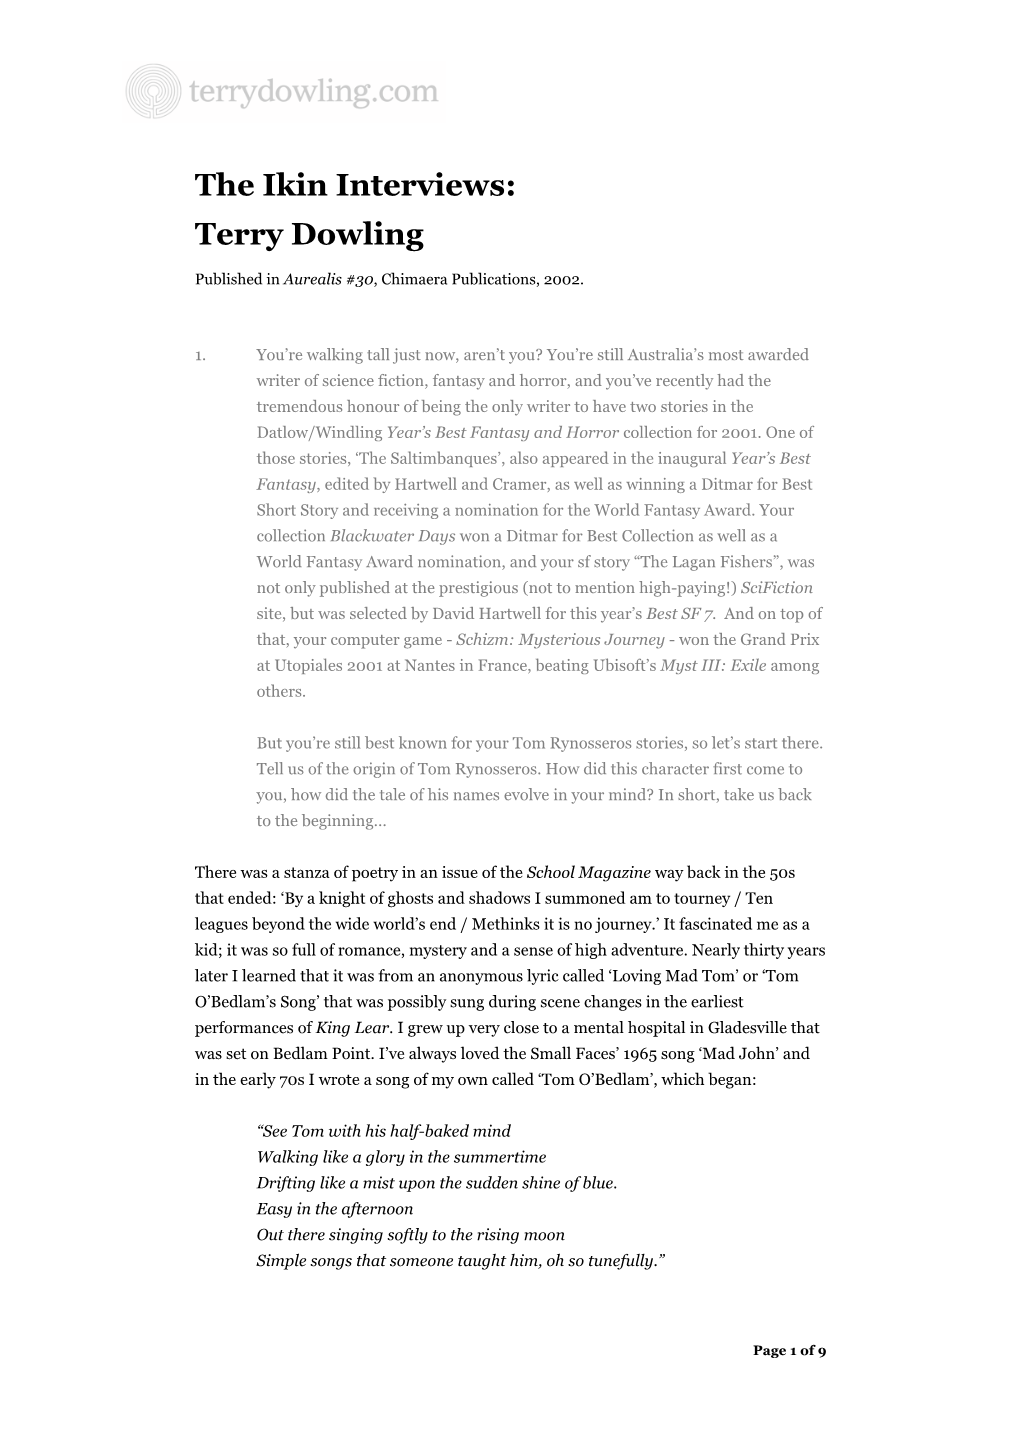 The Ikin Interviews: Terry Dowling